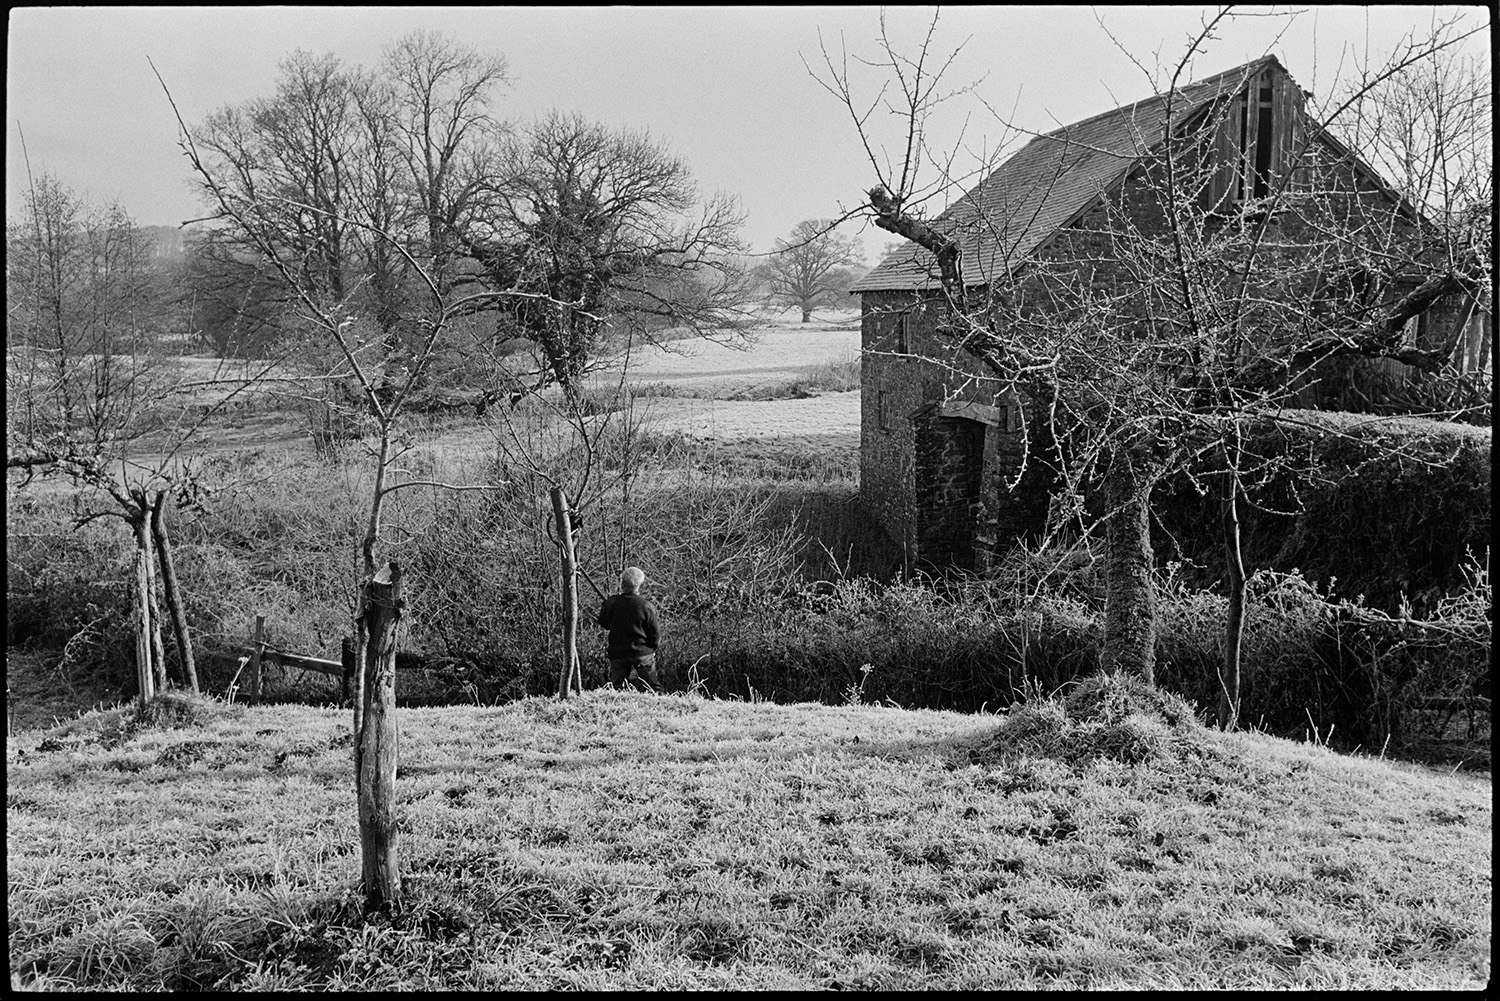 Orchards, Farmer laying hedge in frosty orchard, mill behind. 
[Bill Hammond laying a hedge in a frosty orchard at Rashleigh Mill, Bridge Reeve. The mill buildings can be seen in the background.]